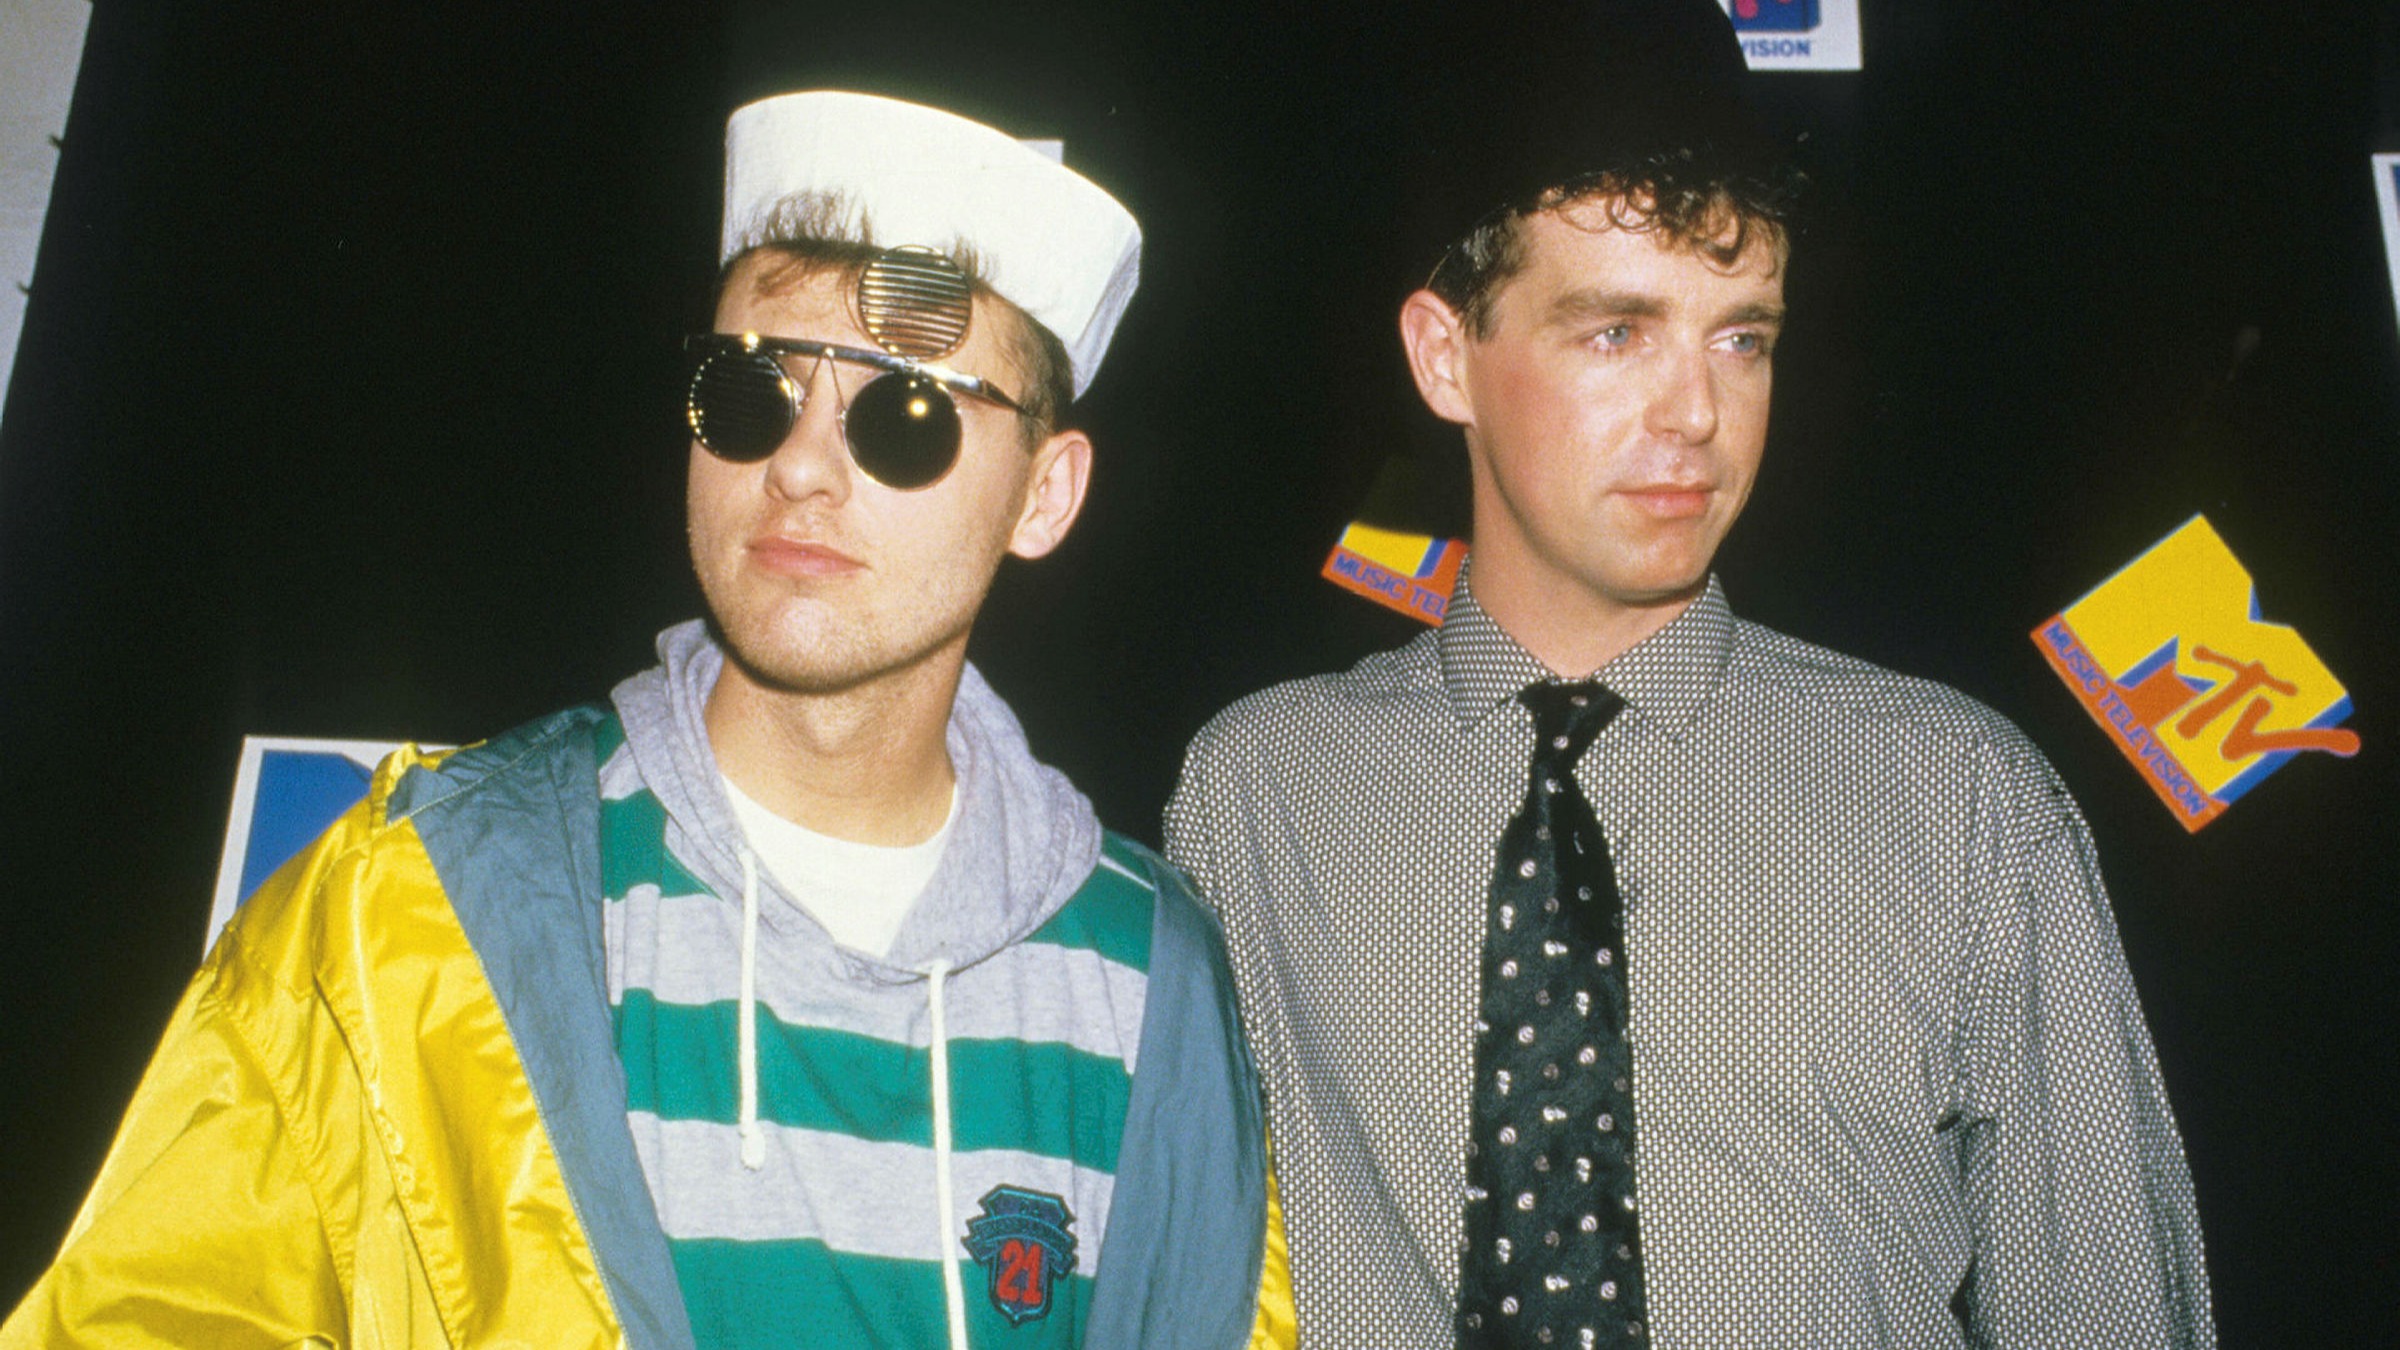 It's a Sin — pure pop provocation from the Pet Shop Boys — FT.com